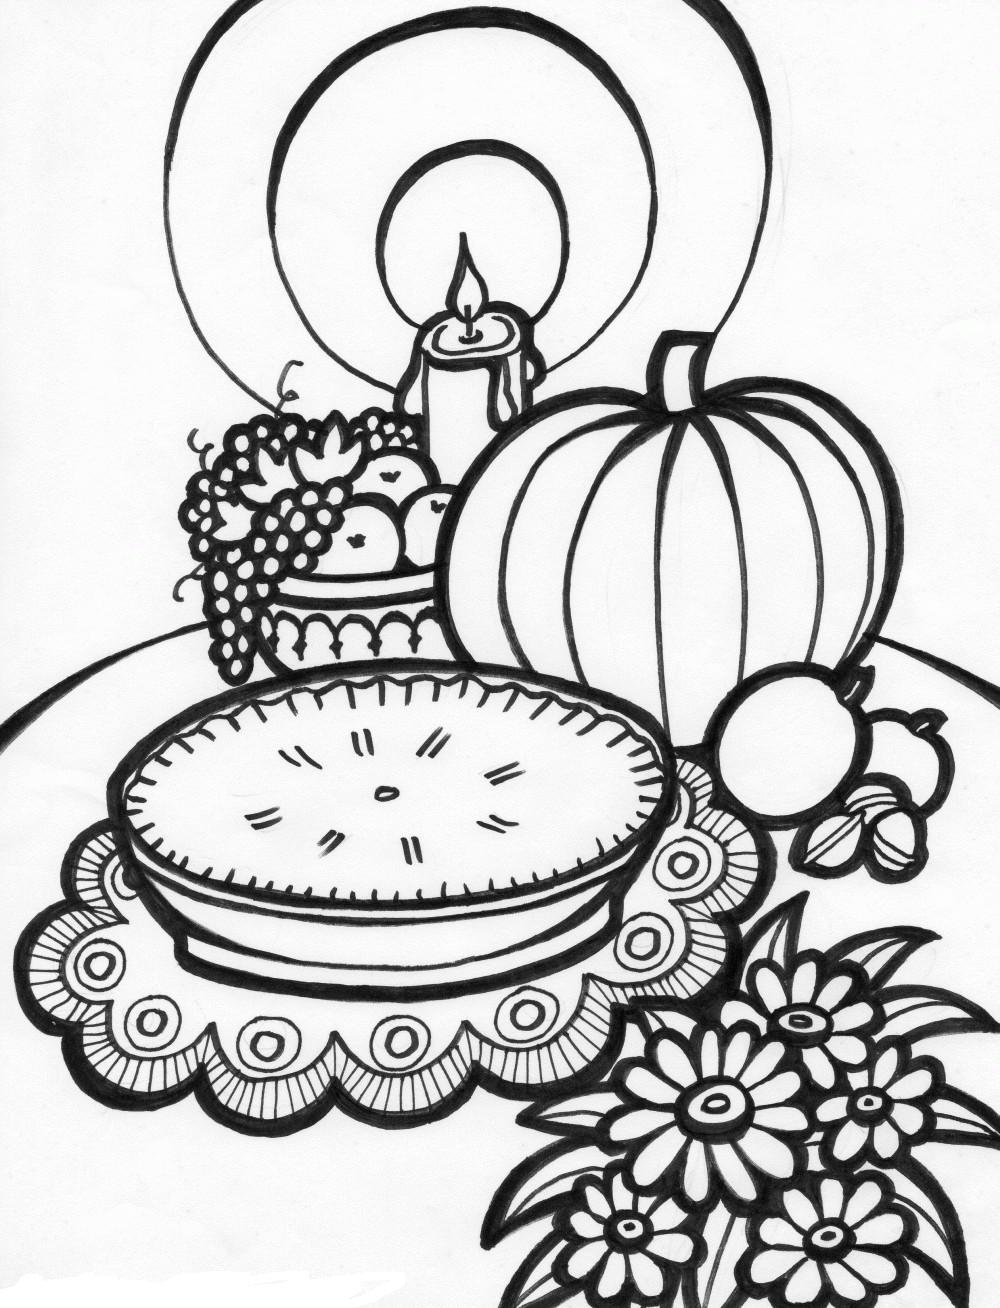 Thanksgiving  Mealdd1f Coloring Page